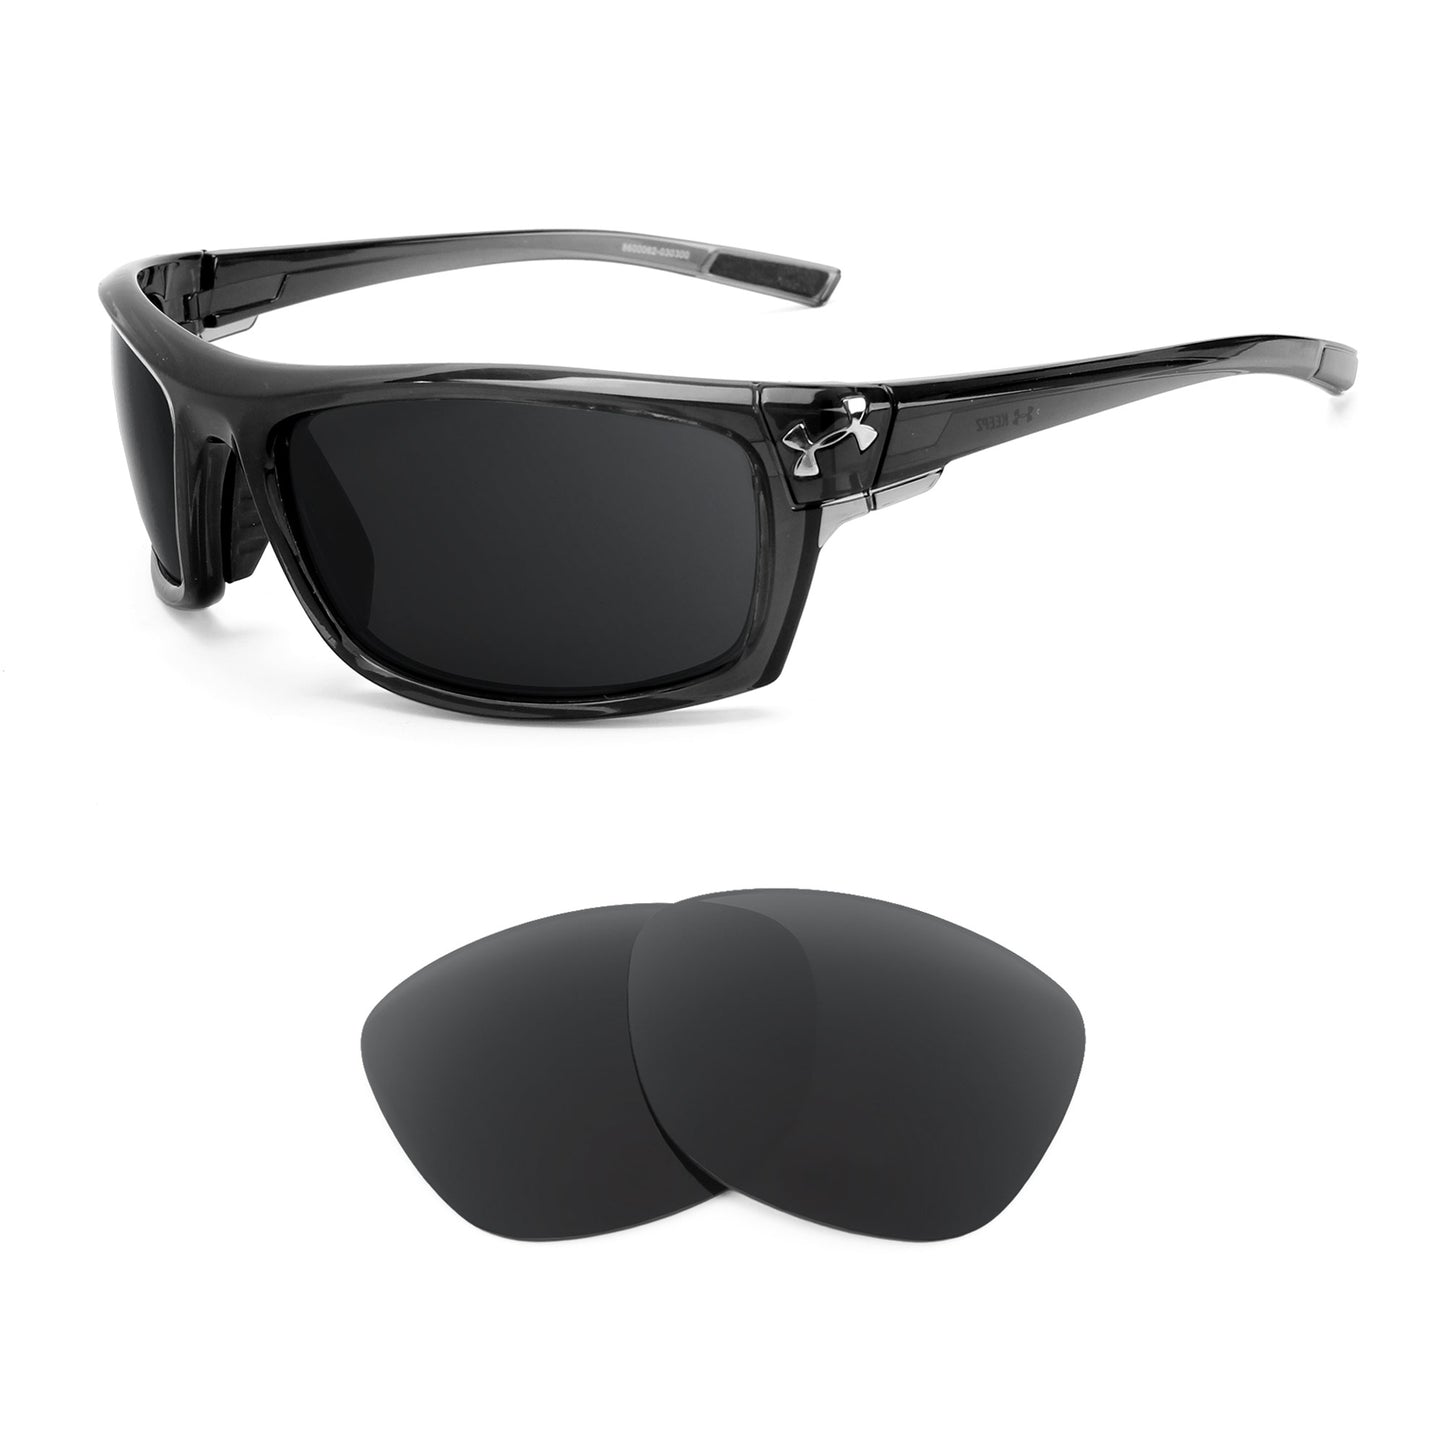 Under Armour Keepz sunglasses with replacement lenses